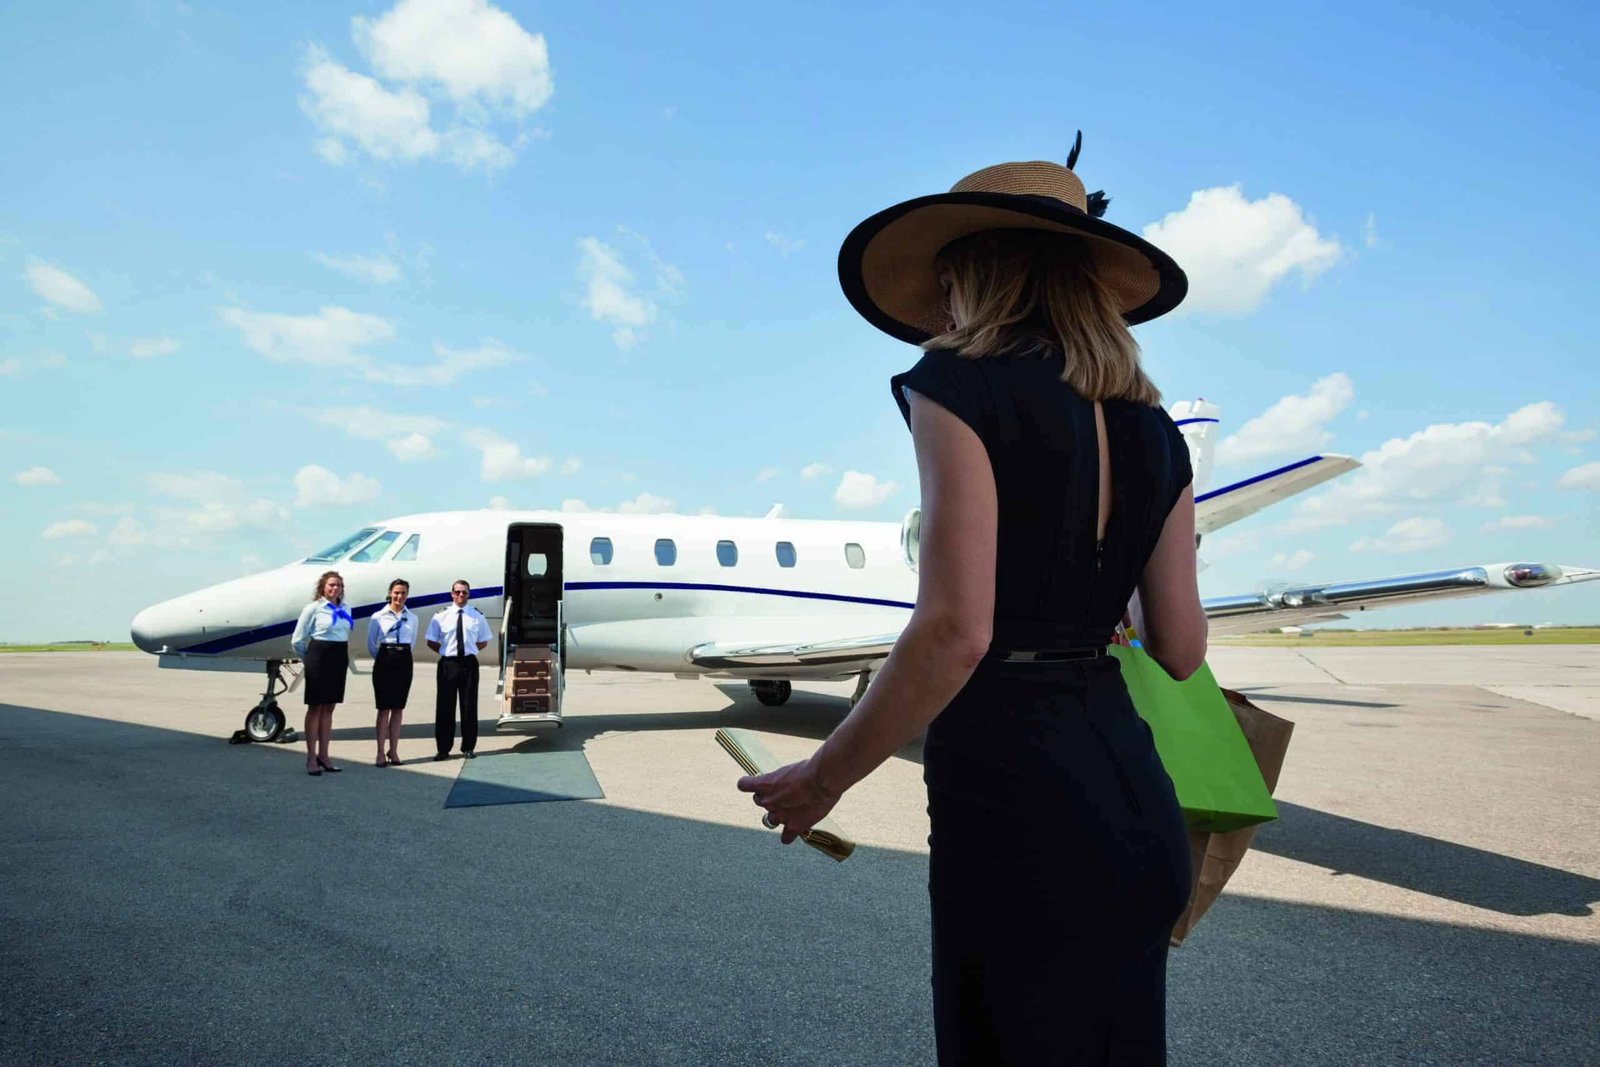 A woman in a black dress standing next to a private plane, discreetly under the radar.